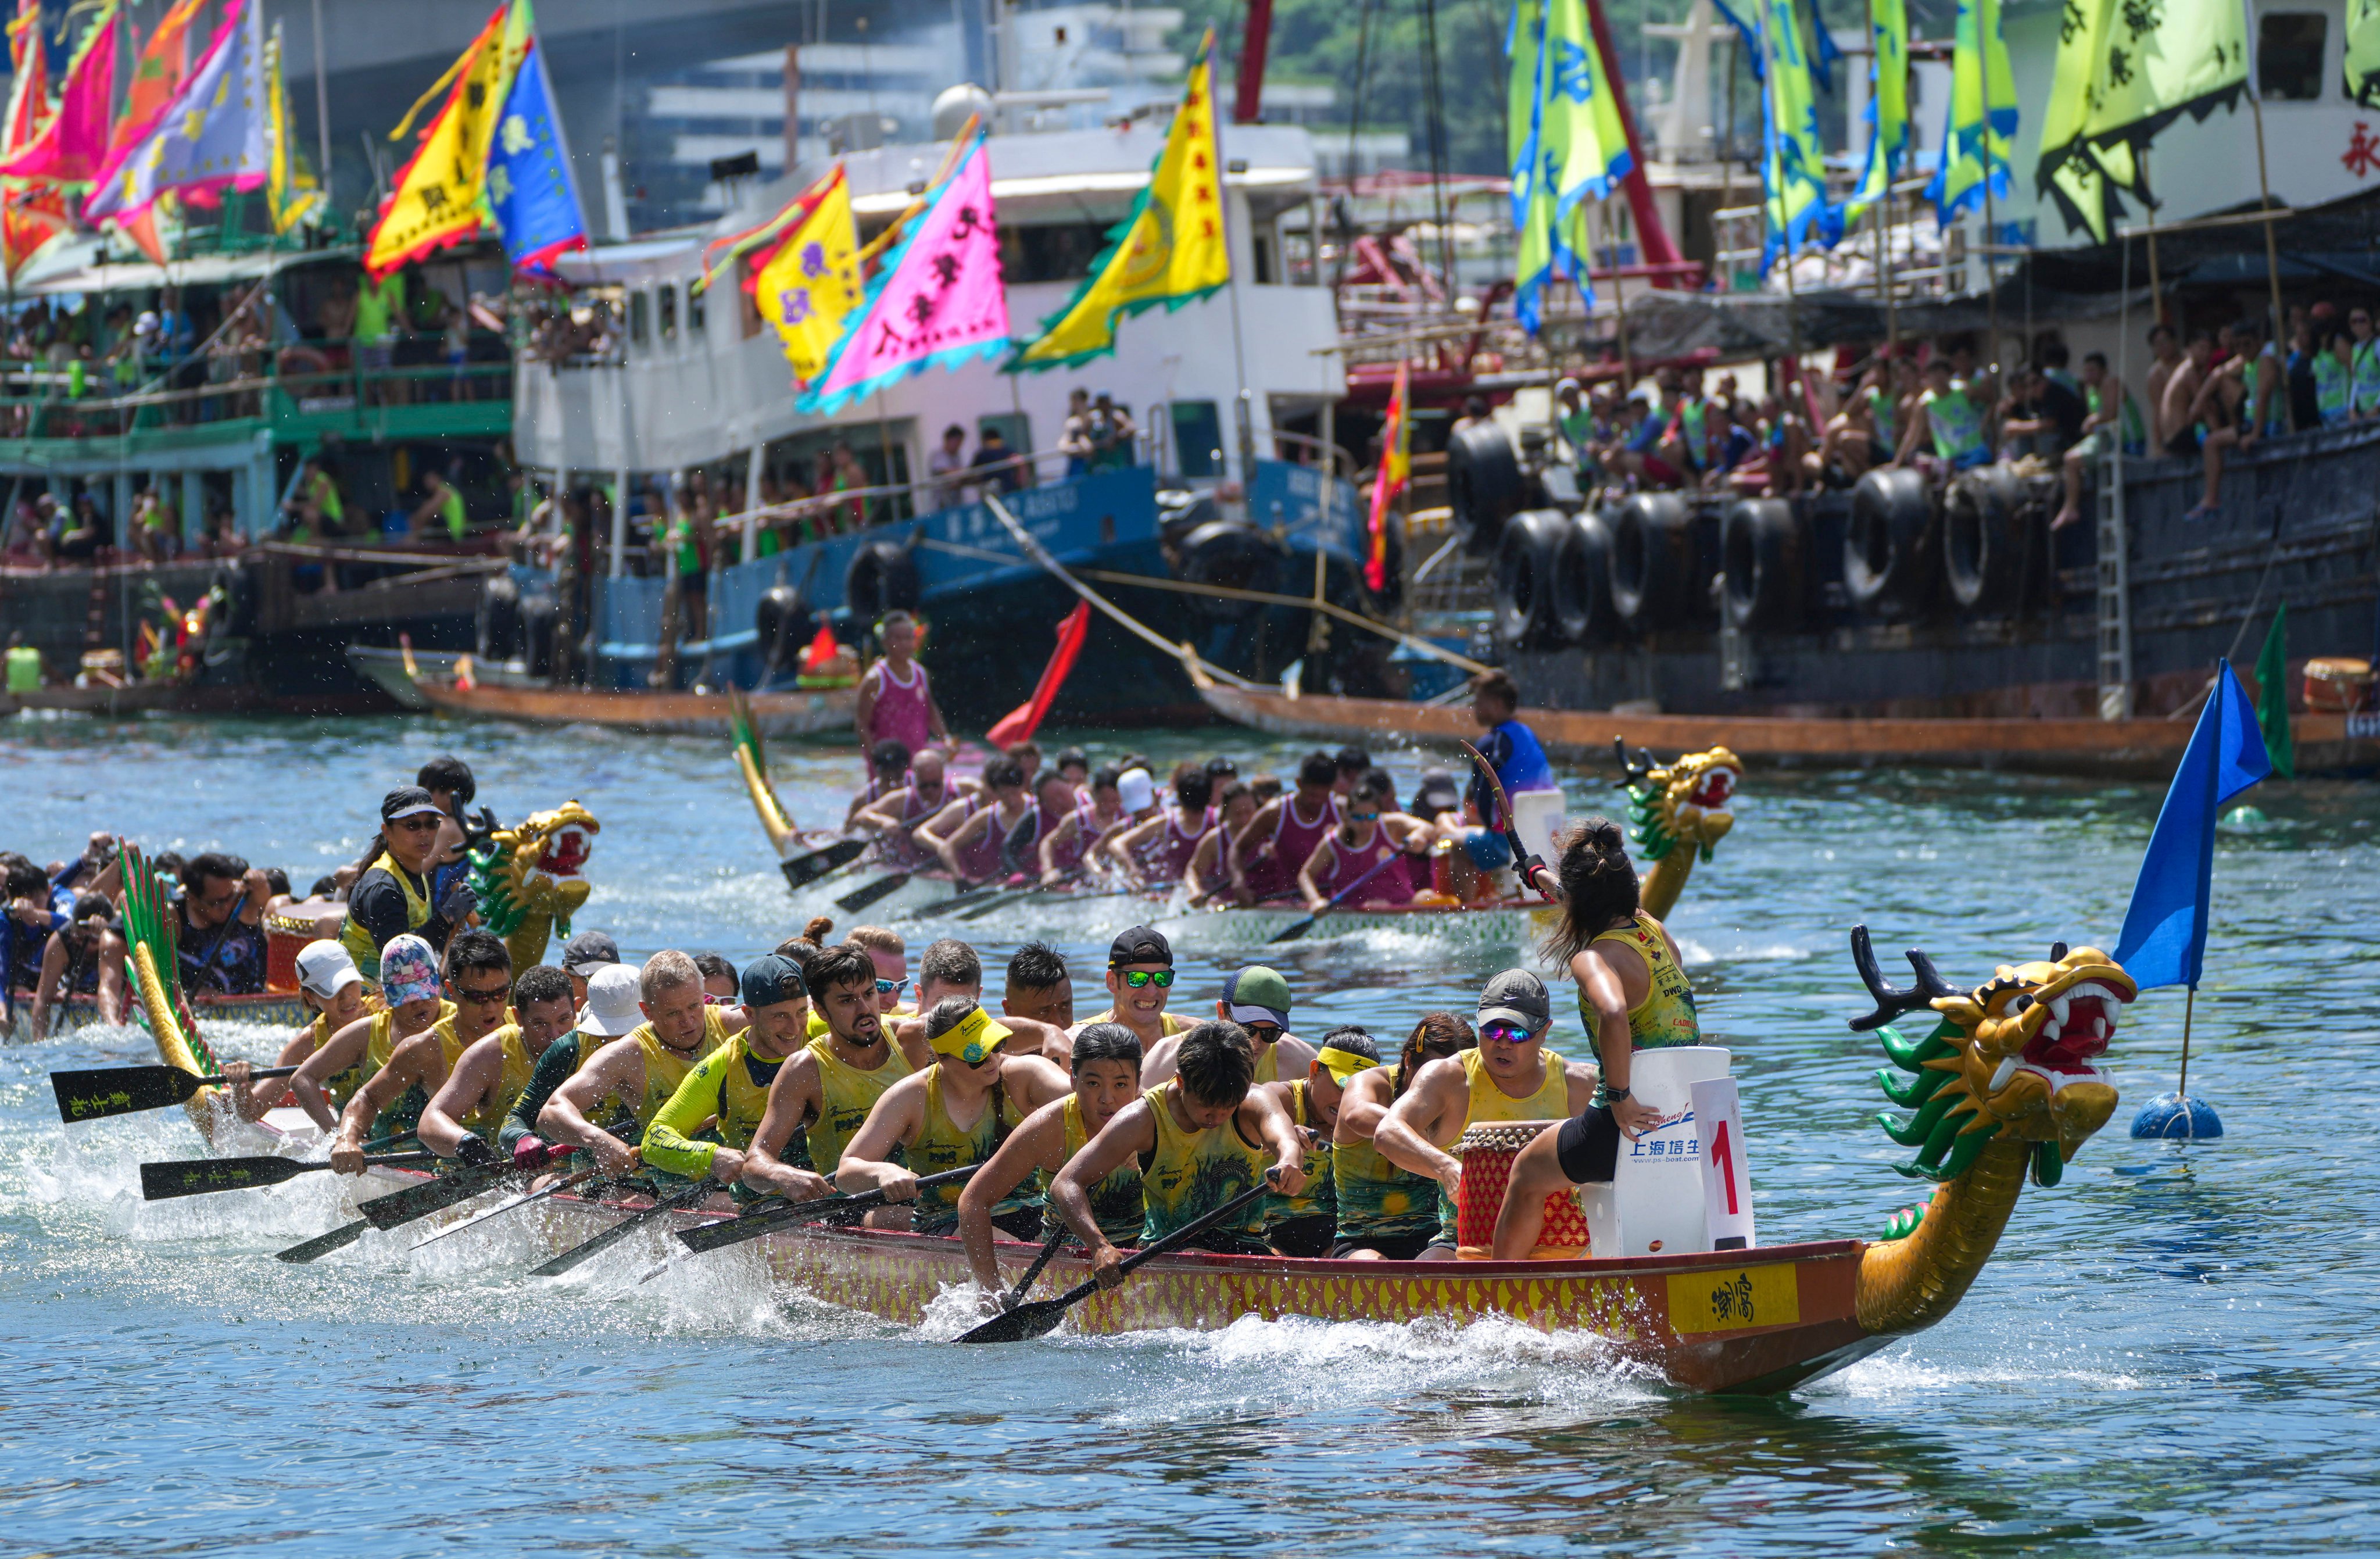 Return of the dragon: Hong Kong welcomes back drum beats and crowds for  Dragon Boat Festival, but race turnout still below pre-pandemic levels